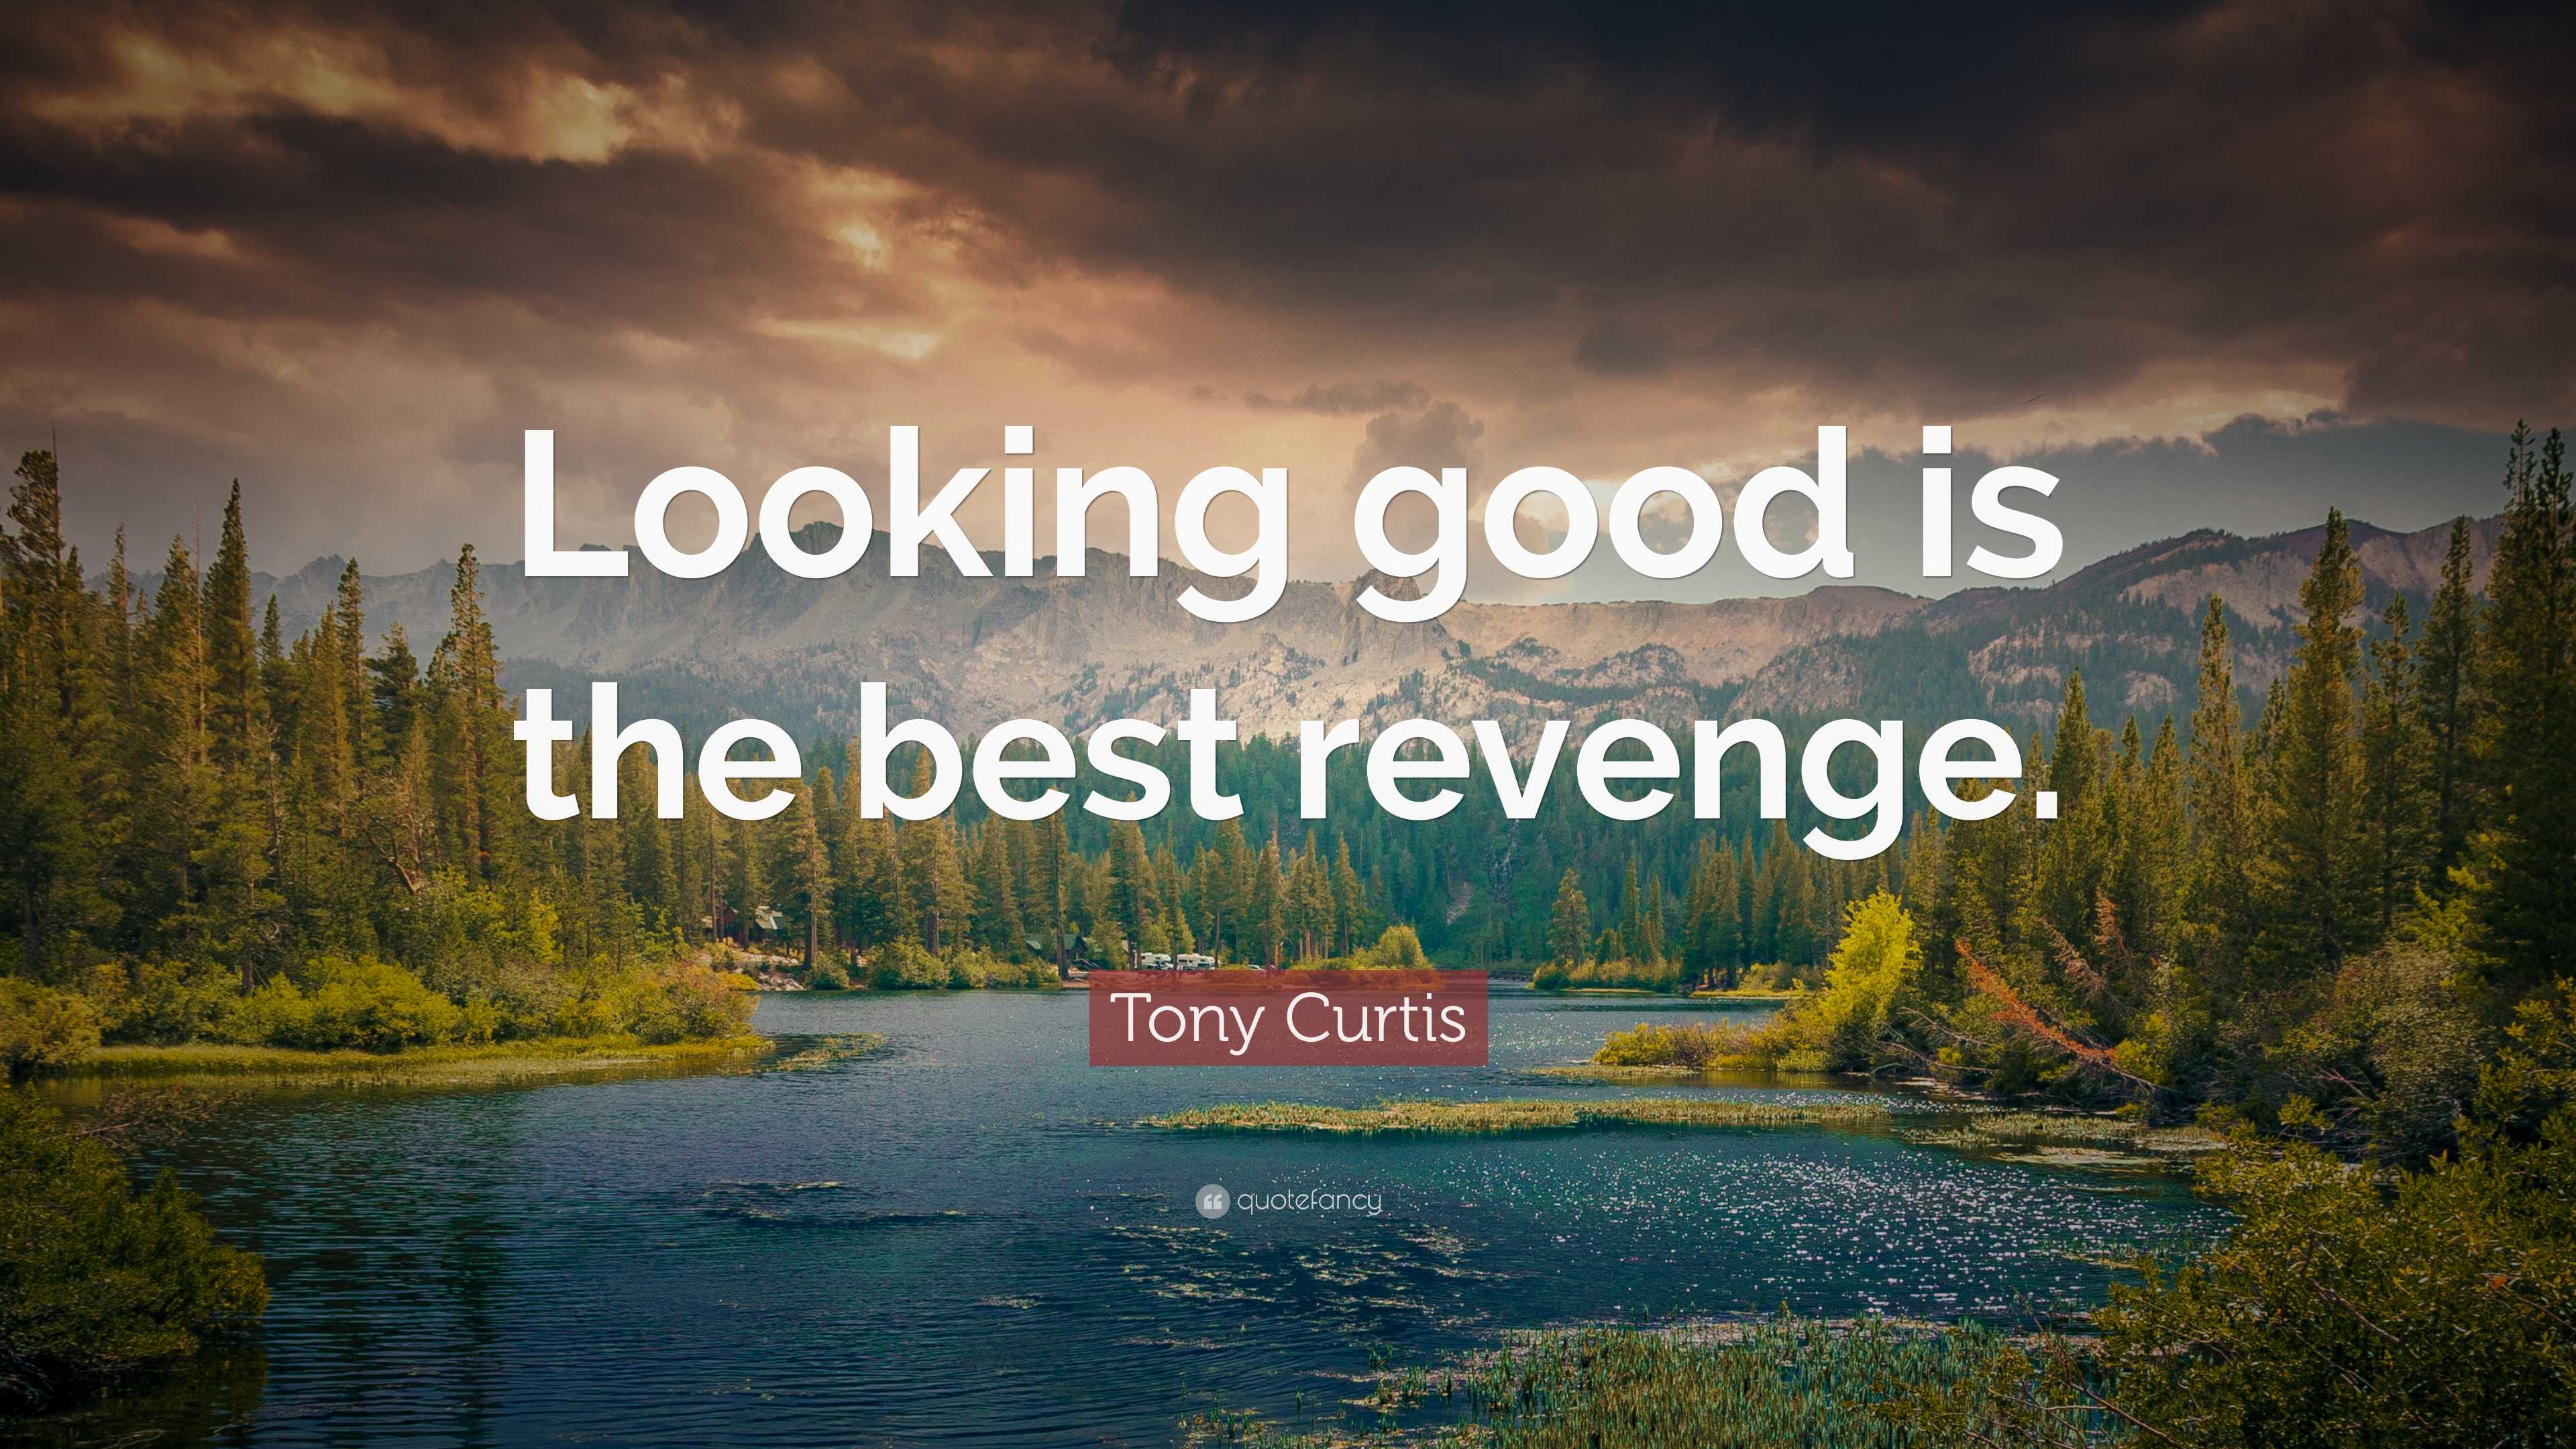 Tony Curtis Quote: “Looking good is the best revenge.”